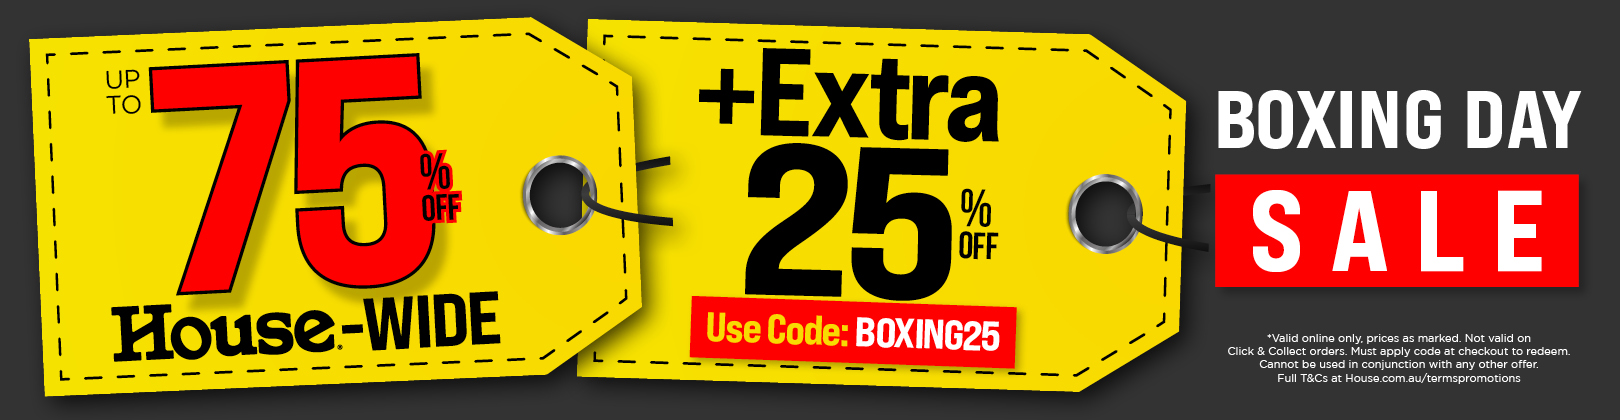 Early Boxing Day sale Up to 75% OFF House-wide plus extra 25% OFF with promo code